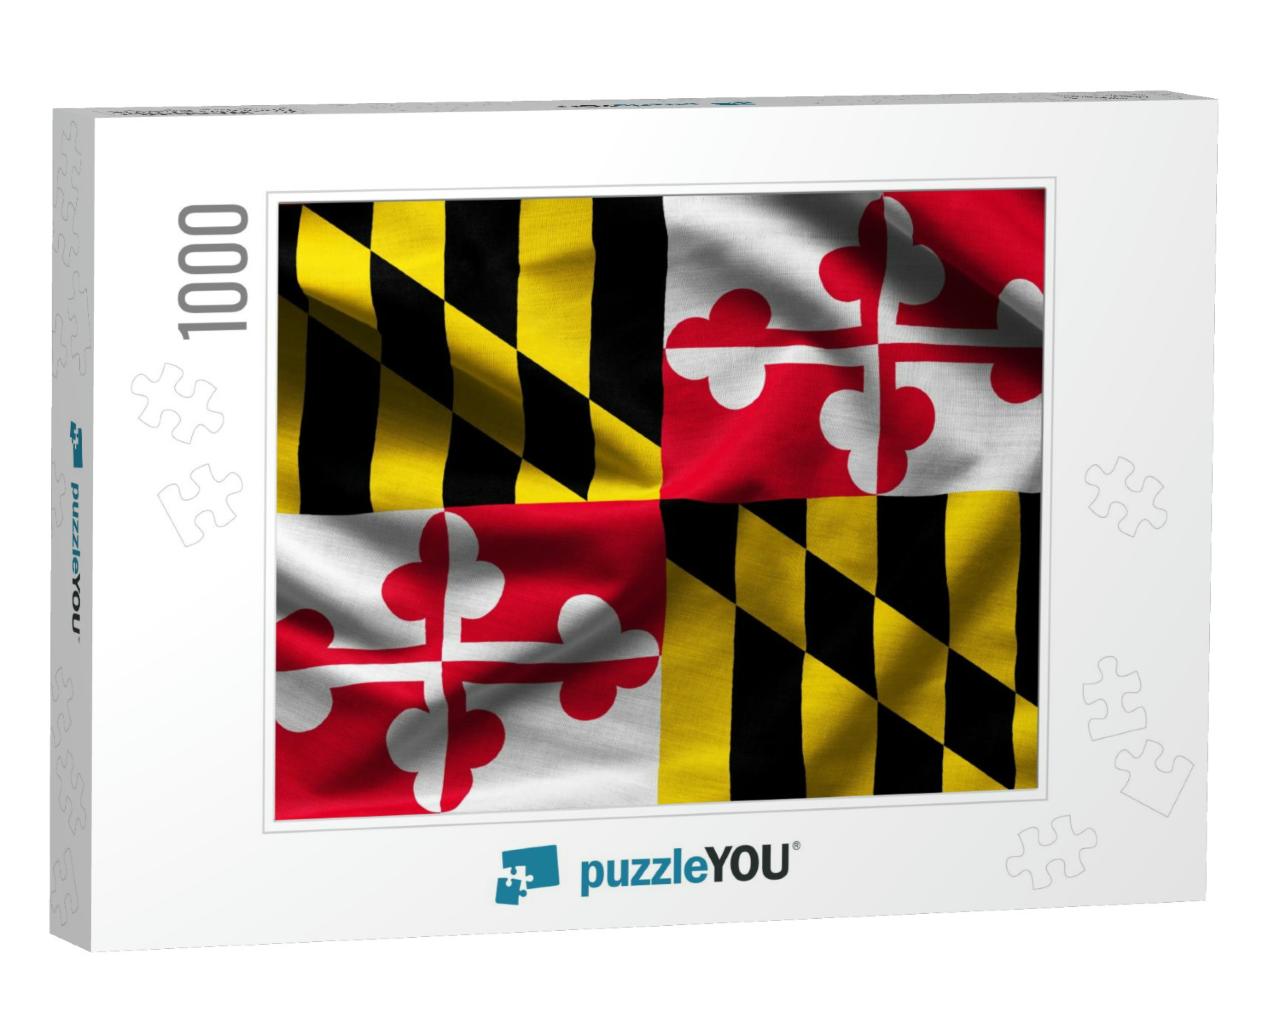 Fabric Texture of the Maryland Flag - Flags from the Usa... Jigsaw Puzzle with 1000 pieces